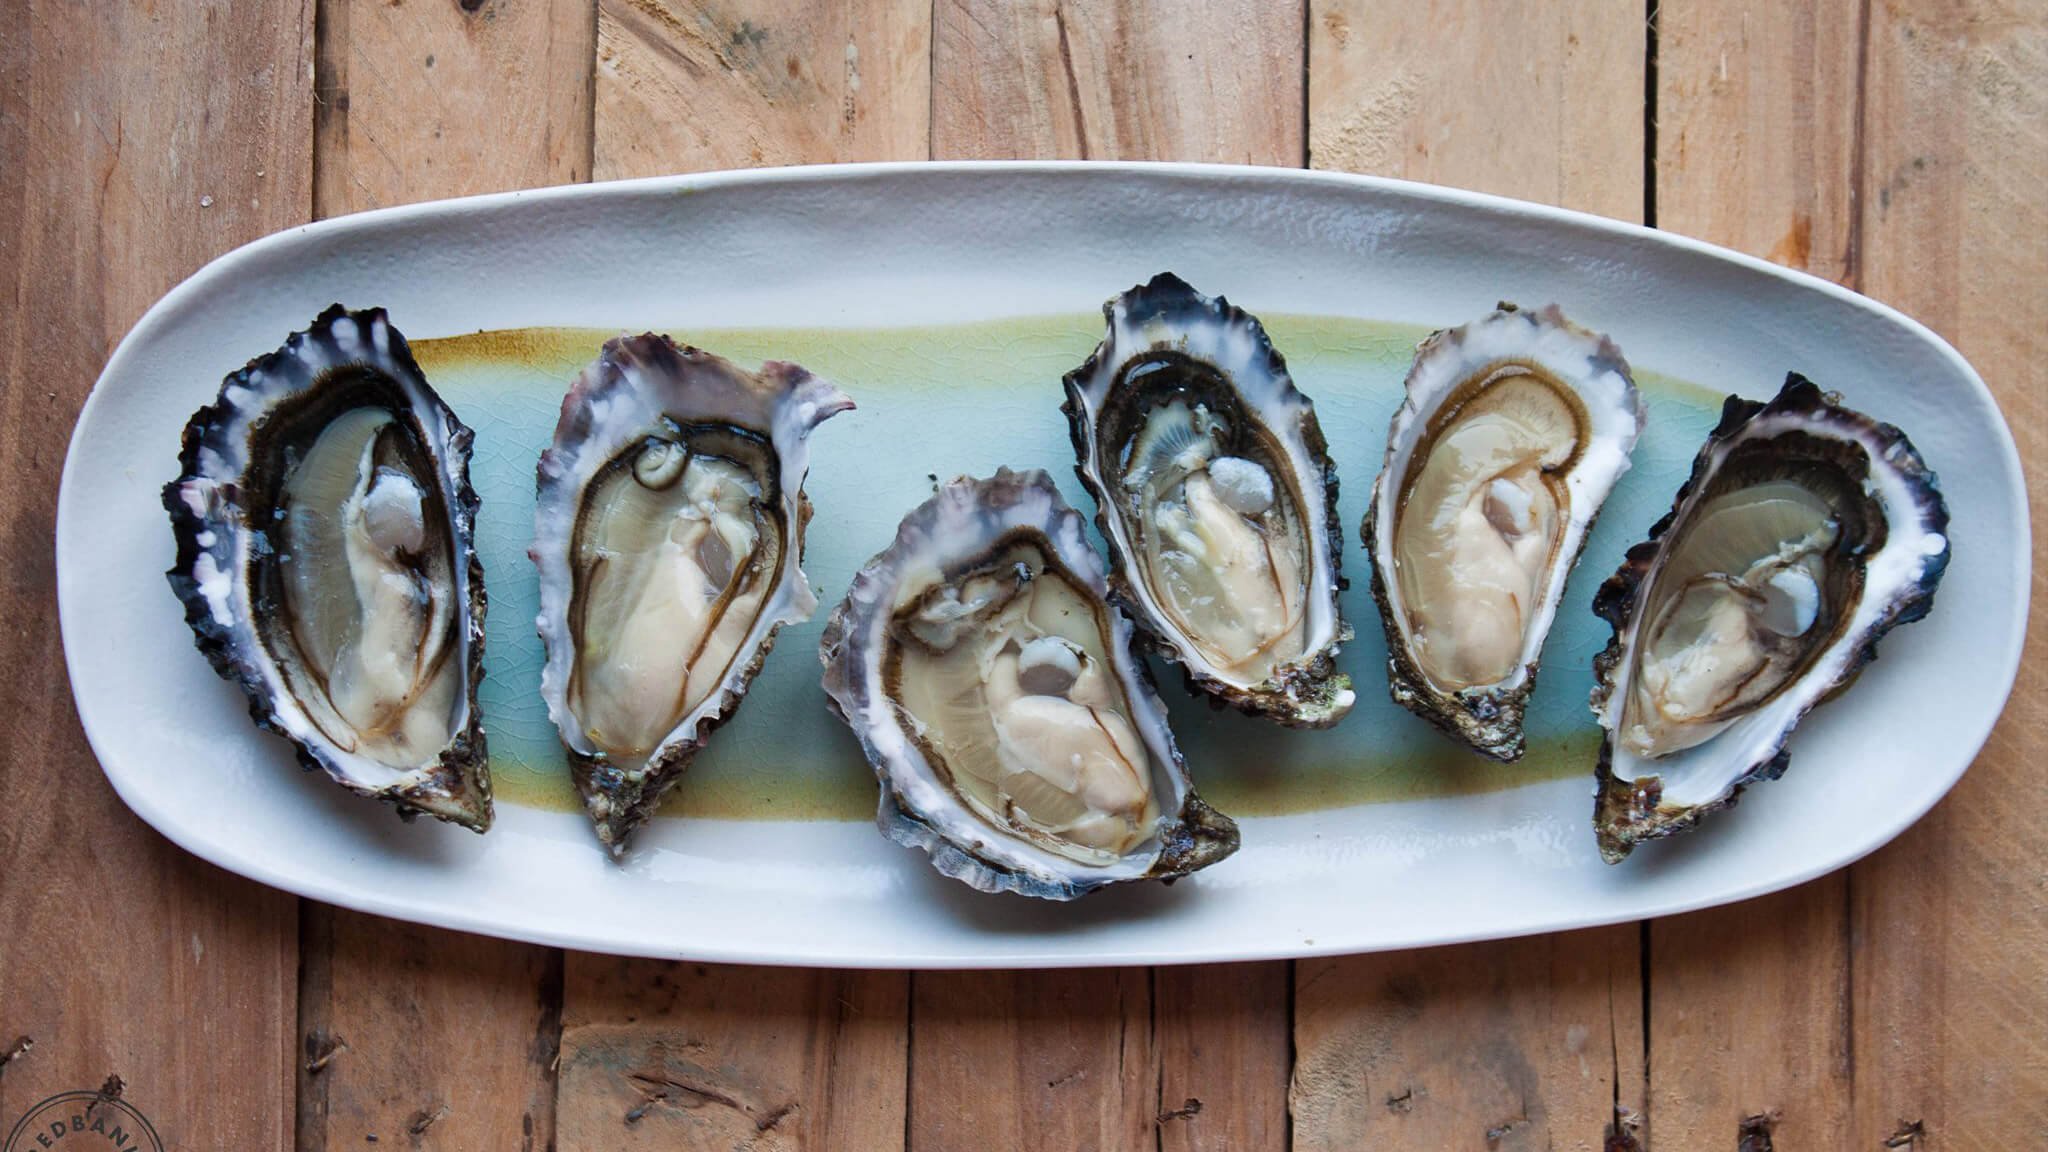 Six fresh oysters on the half shell lie opened on a rectangular plate with wooden background